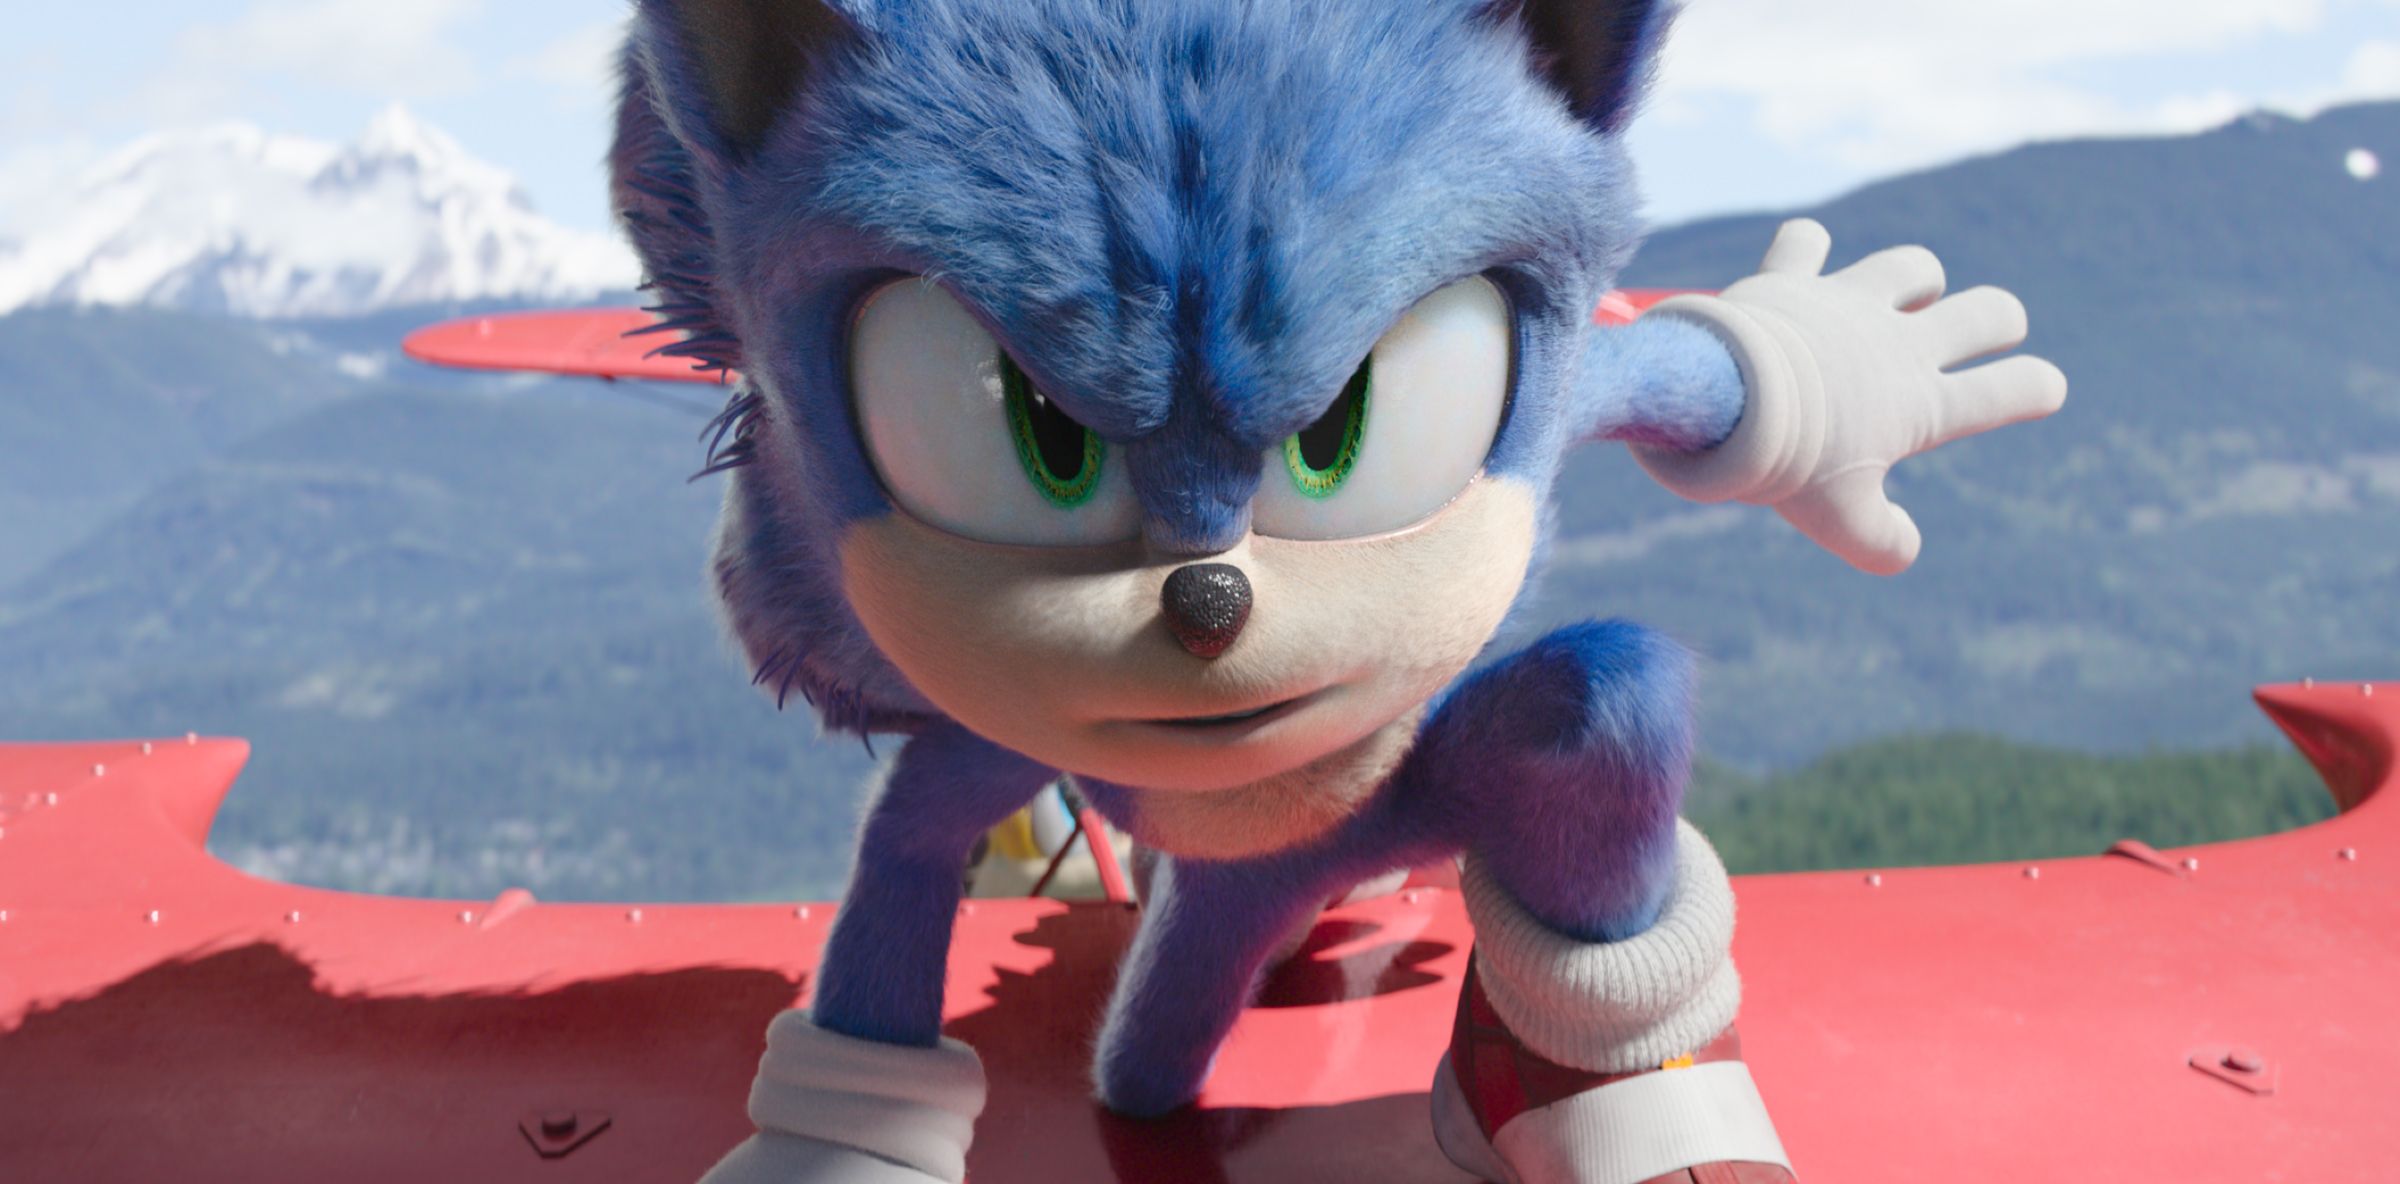 Sonic kneels on top of red plane wing